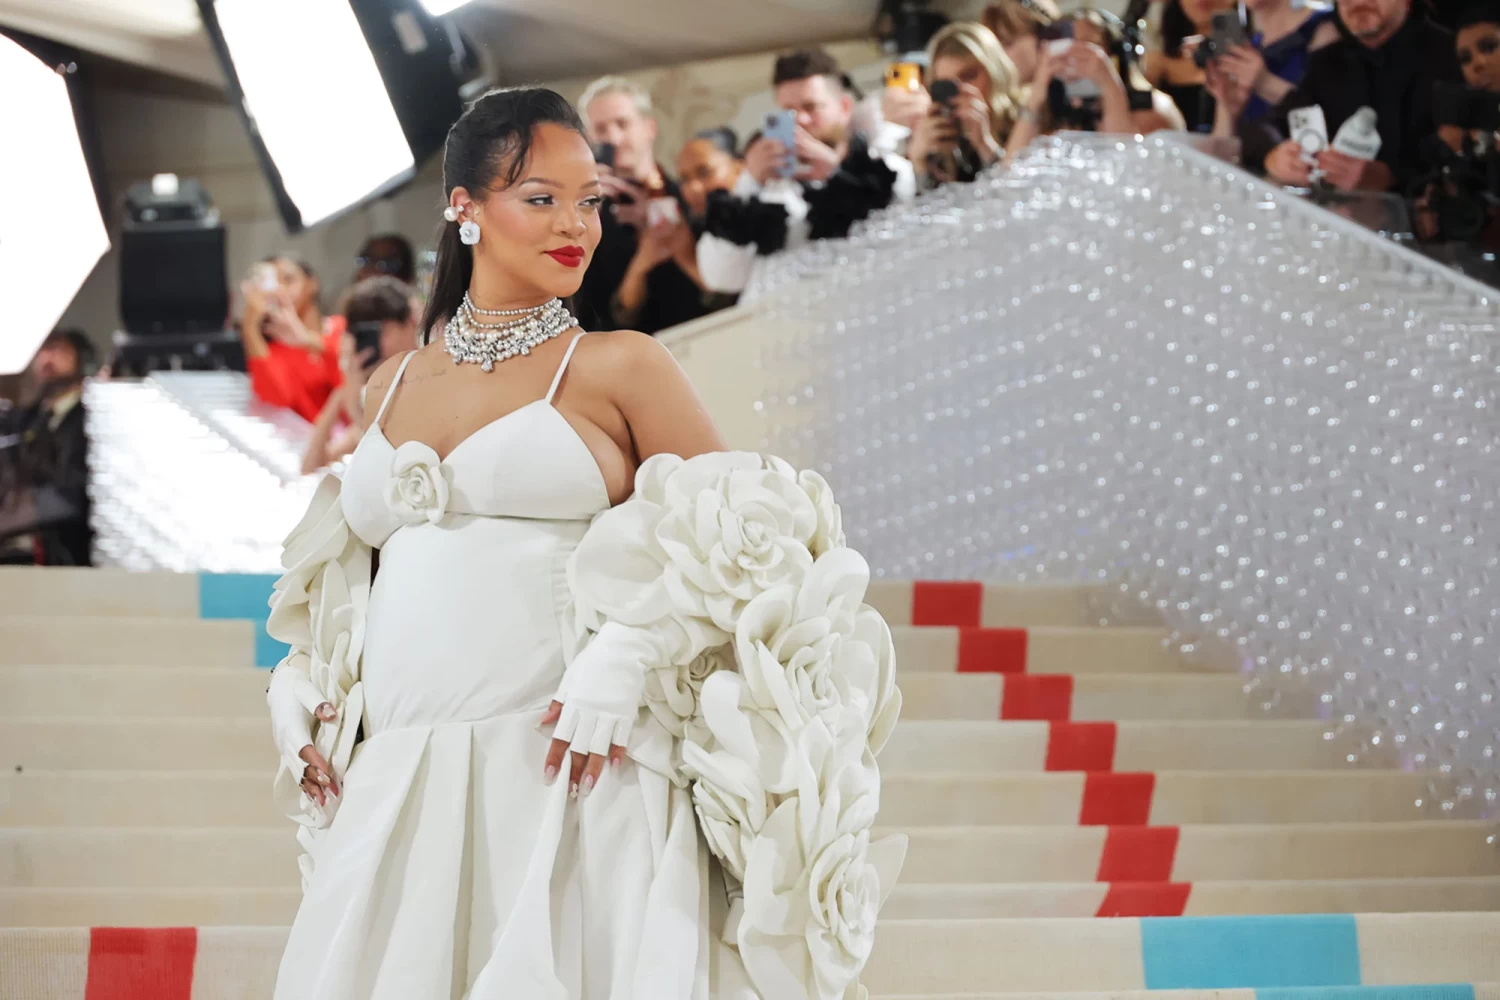 Rihanna's arrival last year marked the grand finale of the red carpet. Mike Coppola/Getty Images